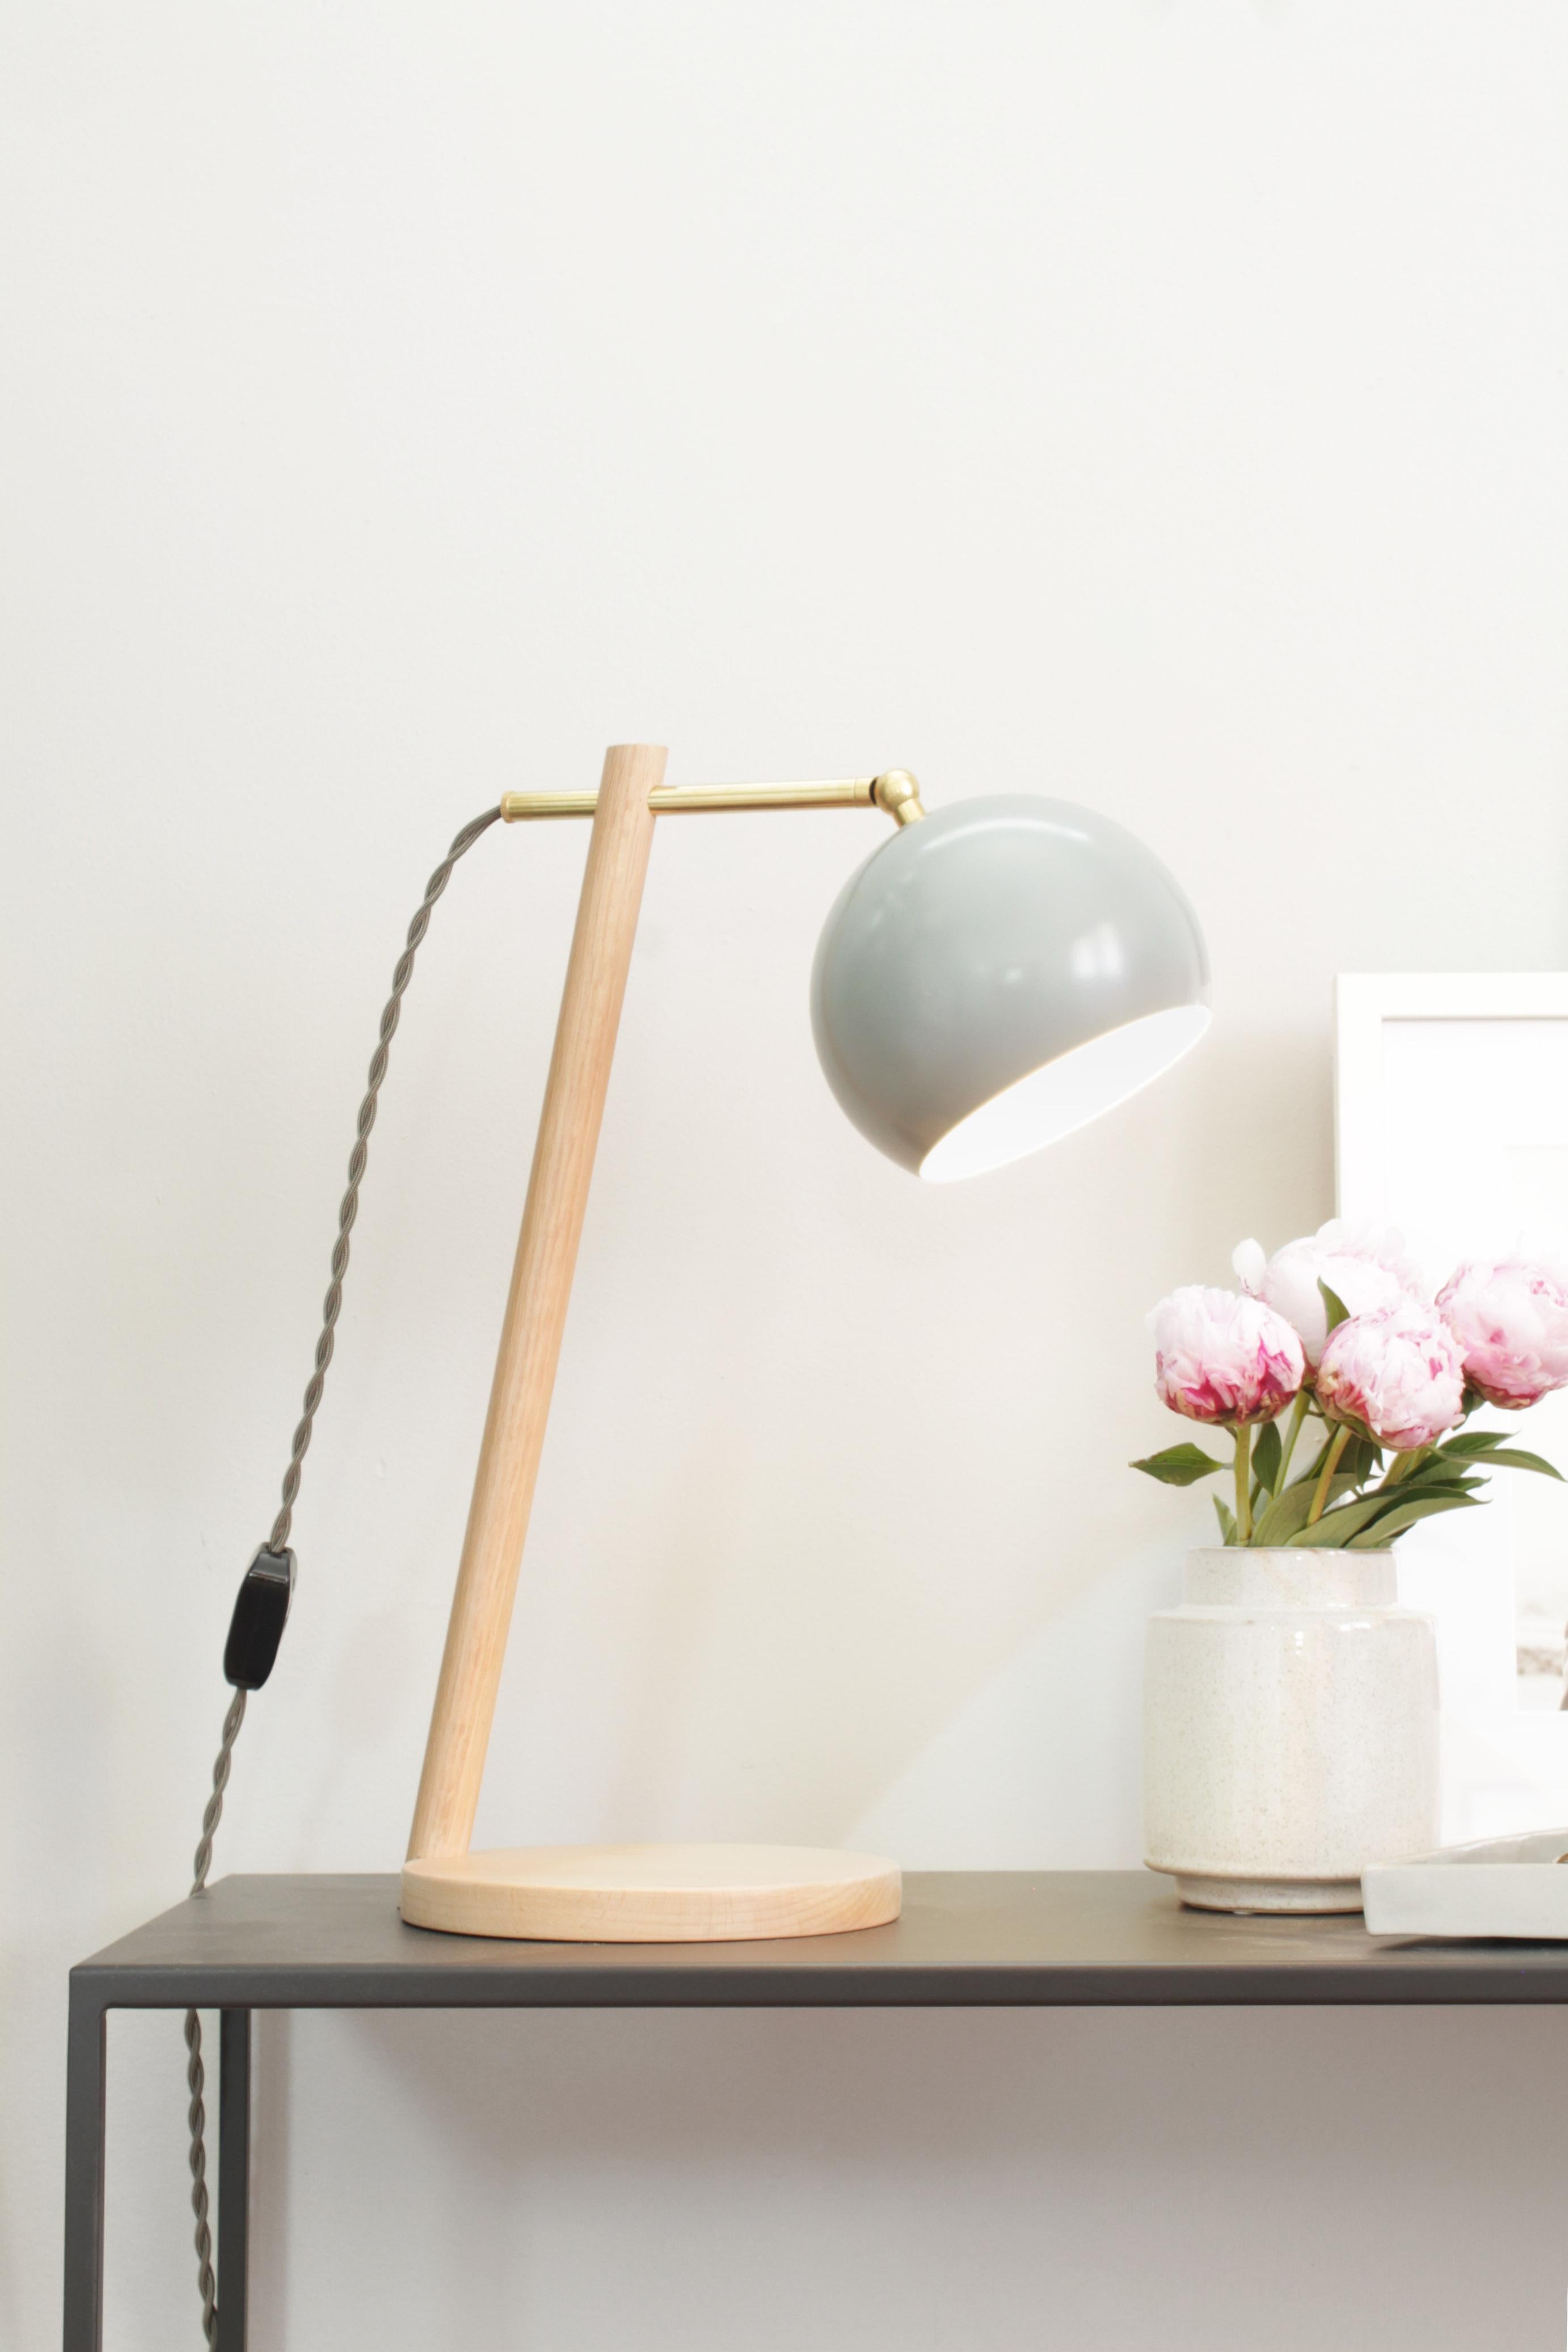 The all new Preston task lamp works just as hard as you do. The sliding brass arm along with the pivoting powder coated steel lamp shade allow you to adjust the light source to you desired location. The solid wood base is handcrafted in a variety of